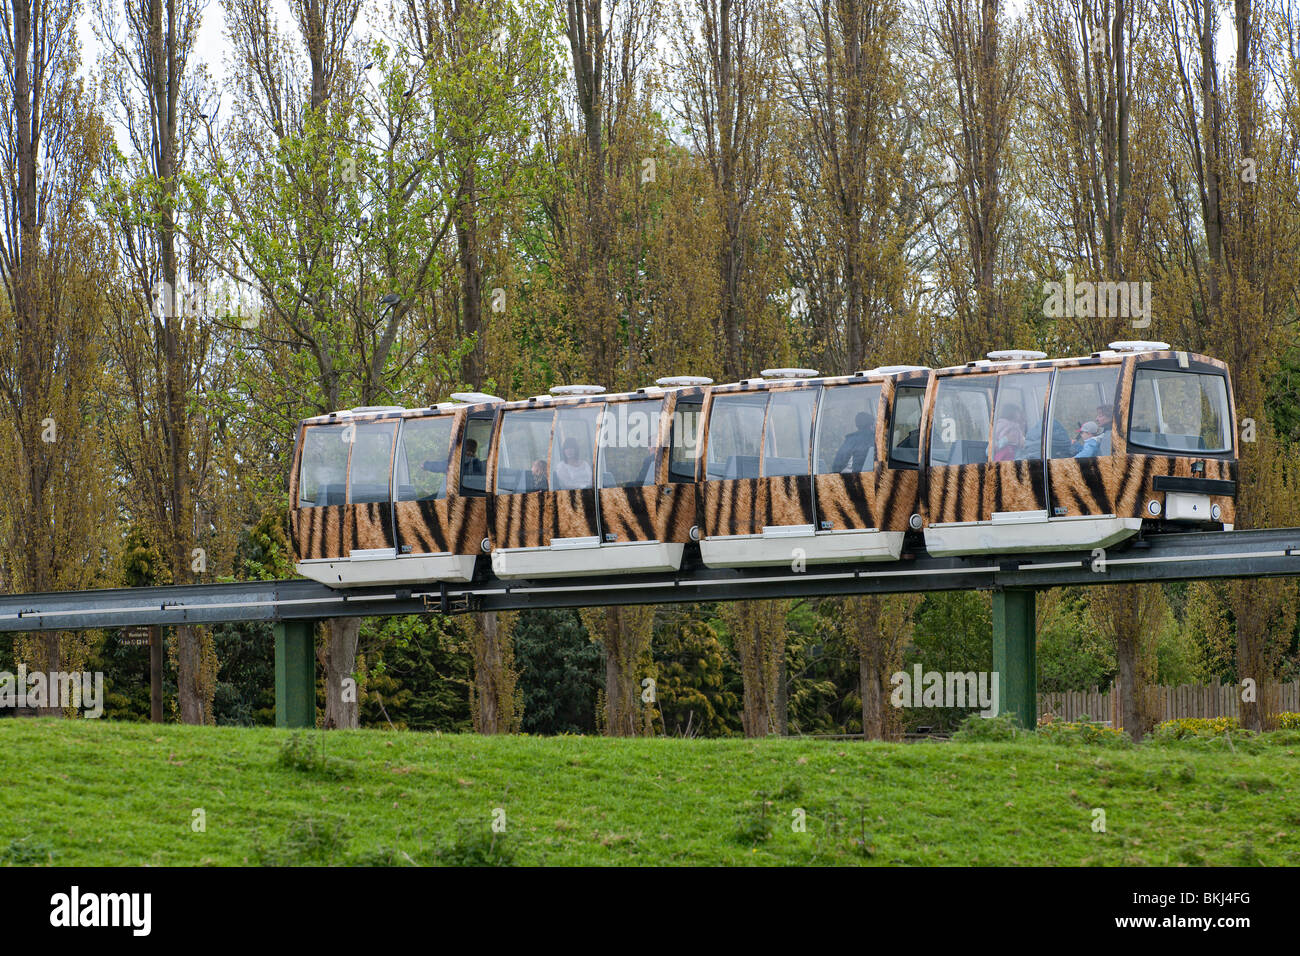 Monorail painted with Tiger stripes carries visitors around the grounds of Chester Zoo in England Stock Photo